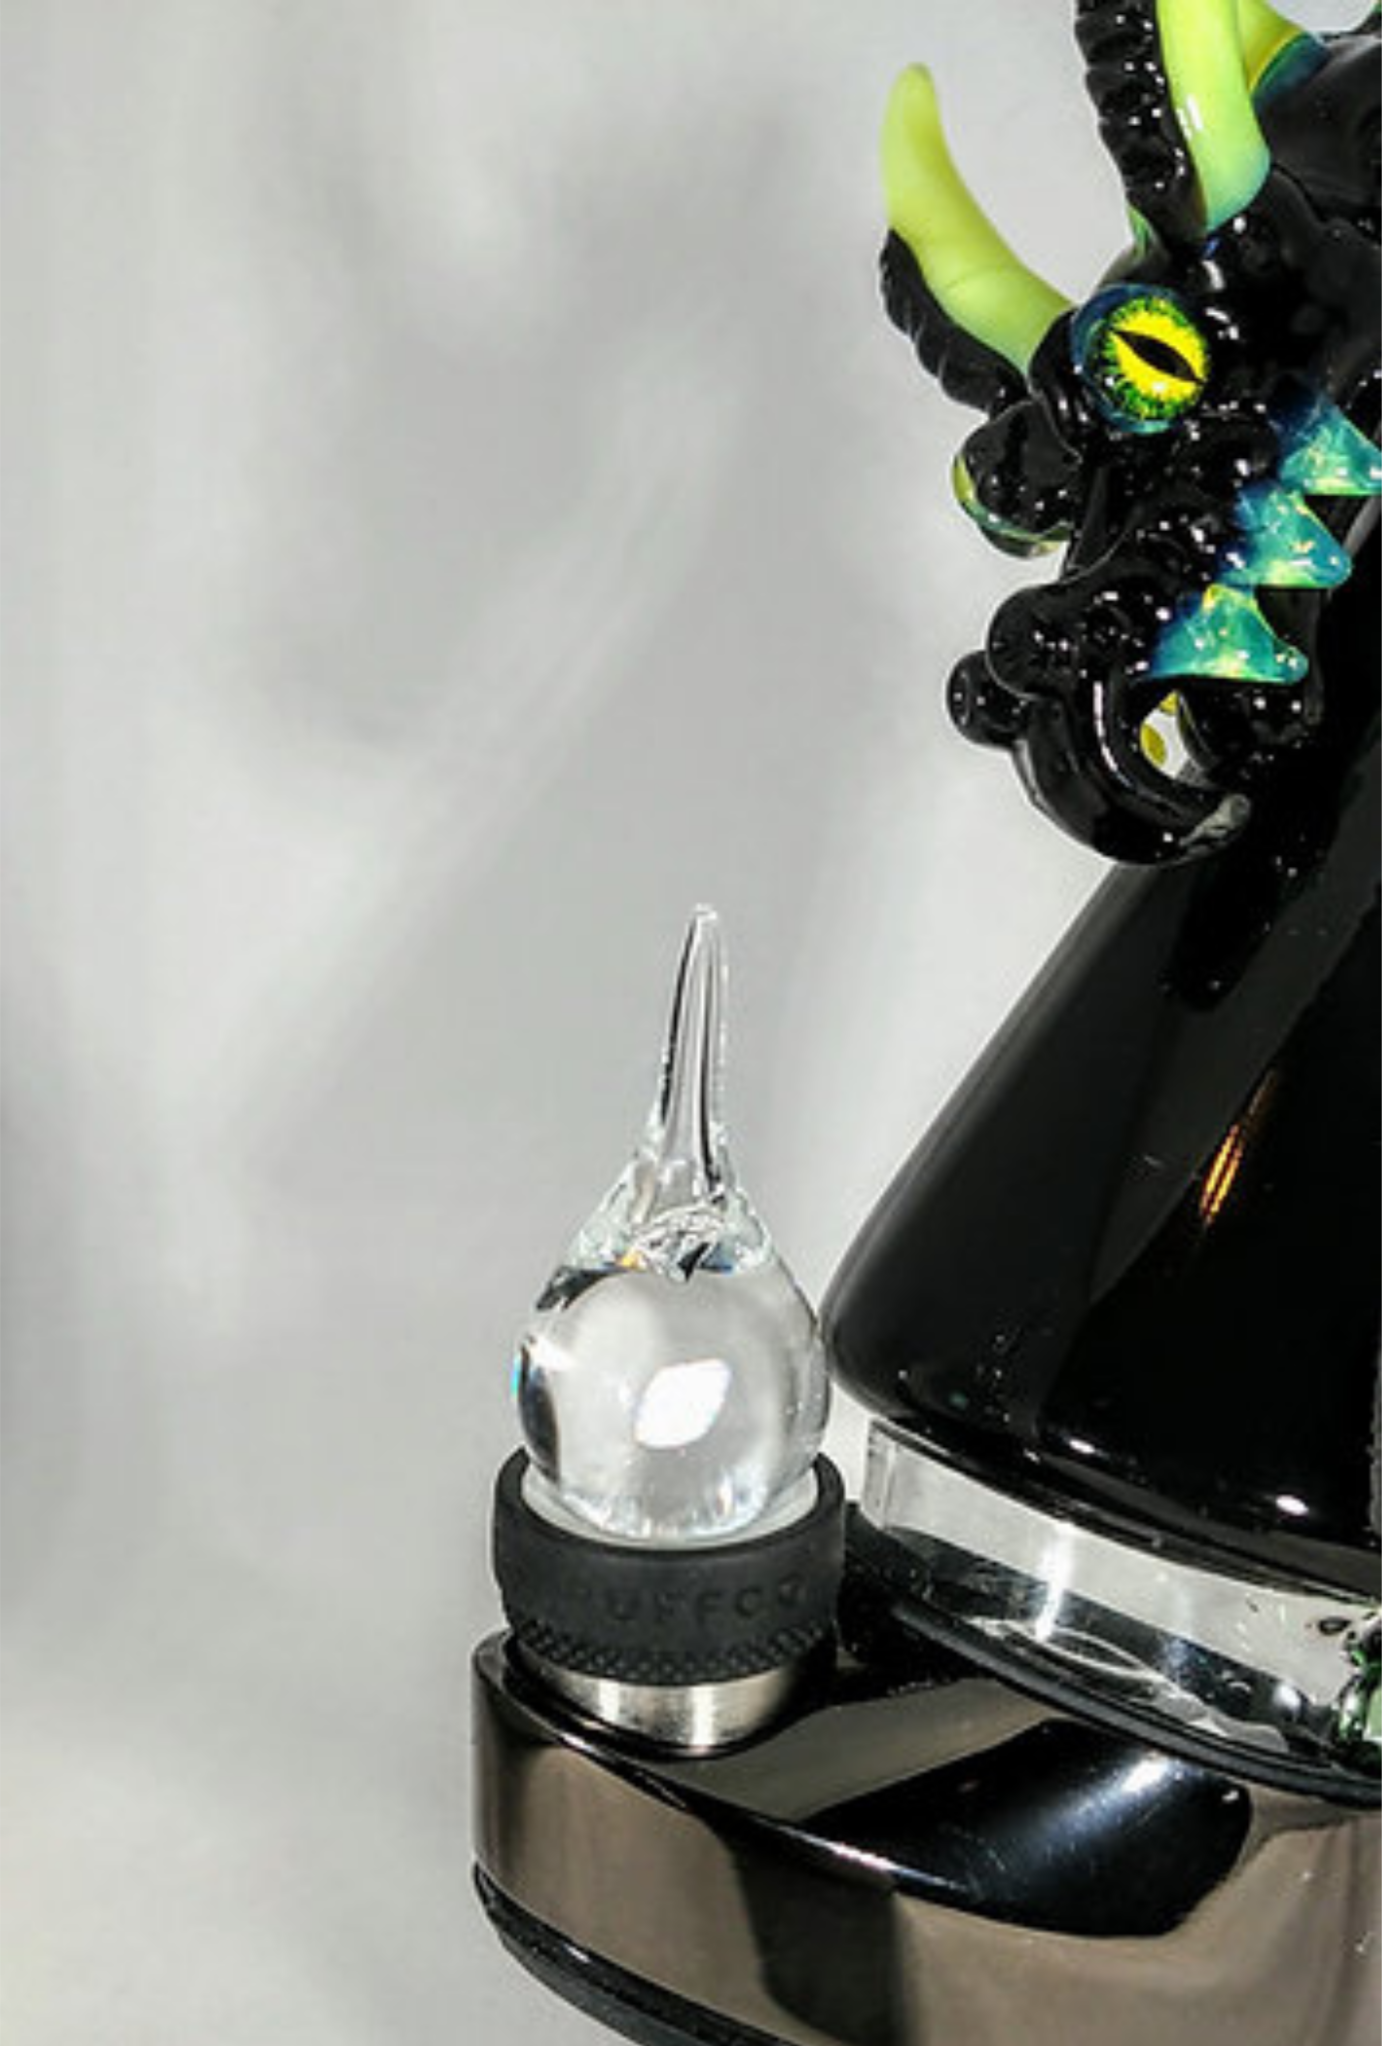 Black Dragon Puffco Attachment with LED - GiggleGlass